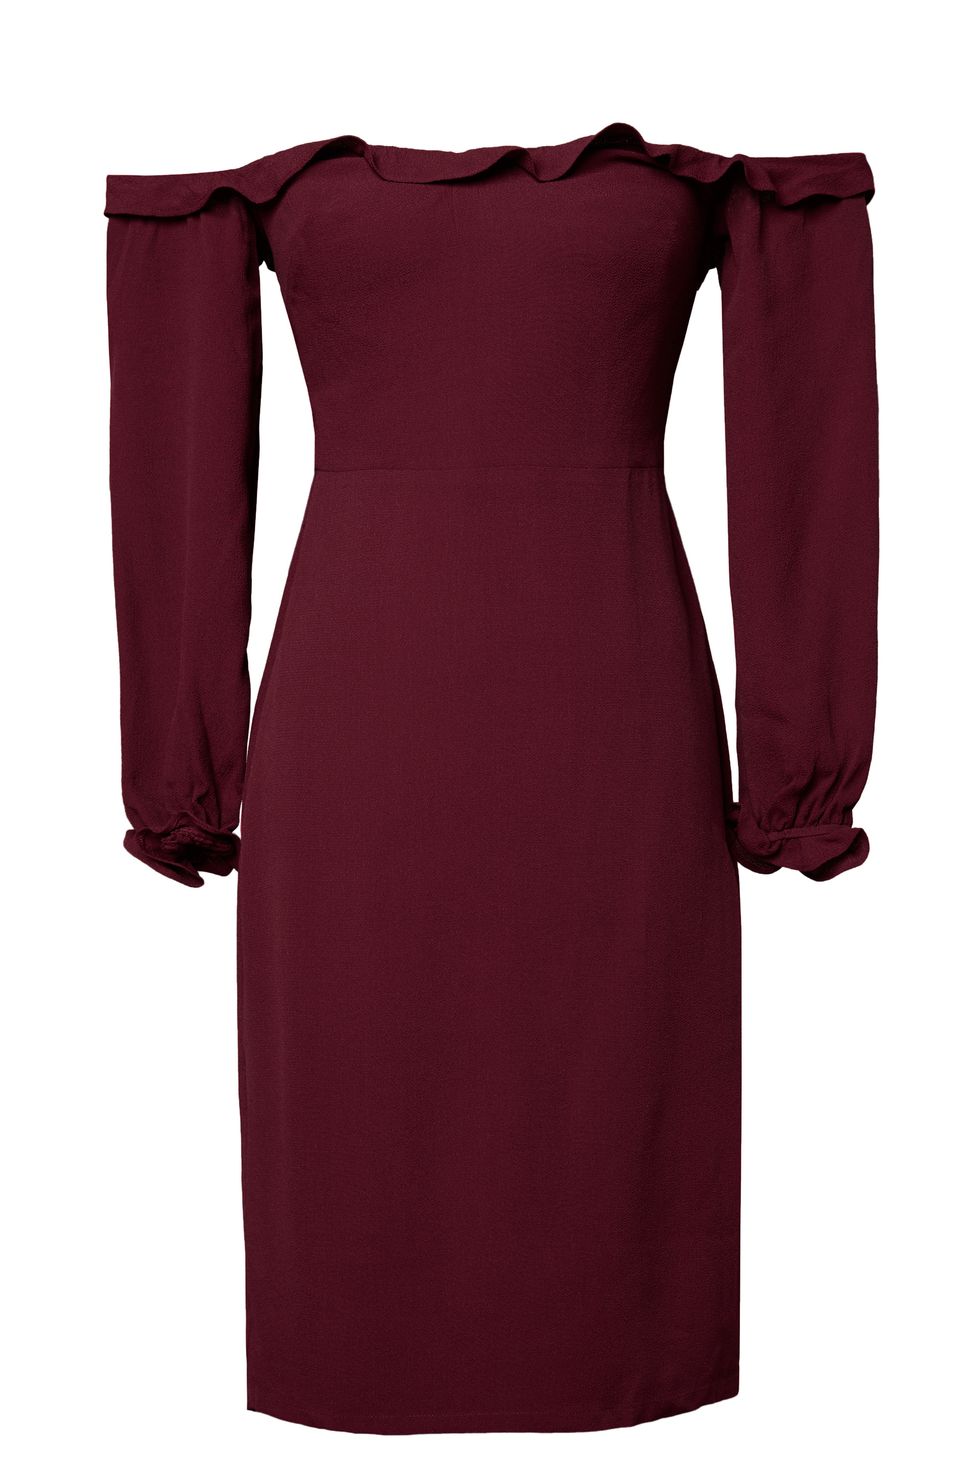 <p>The Reformation Prue Dress, $218; <a href="https://www.thereformation.com/products/prue-dress-garnet" target="_blank">thereformation.com</a></p>